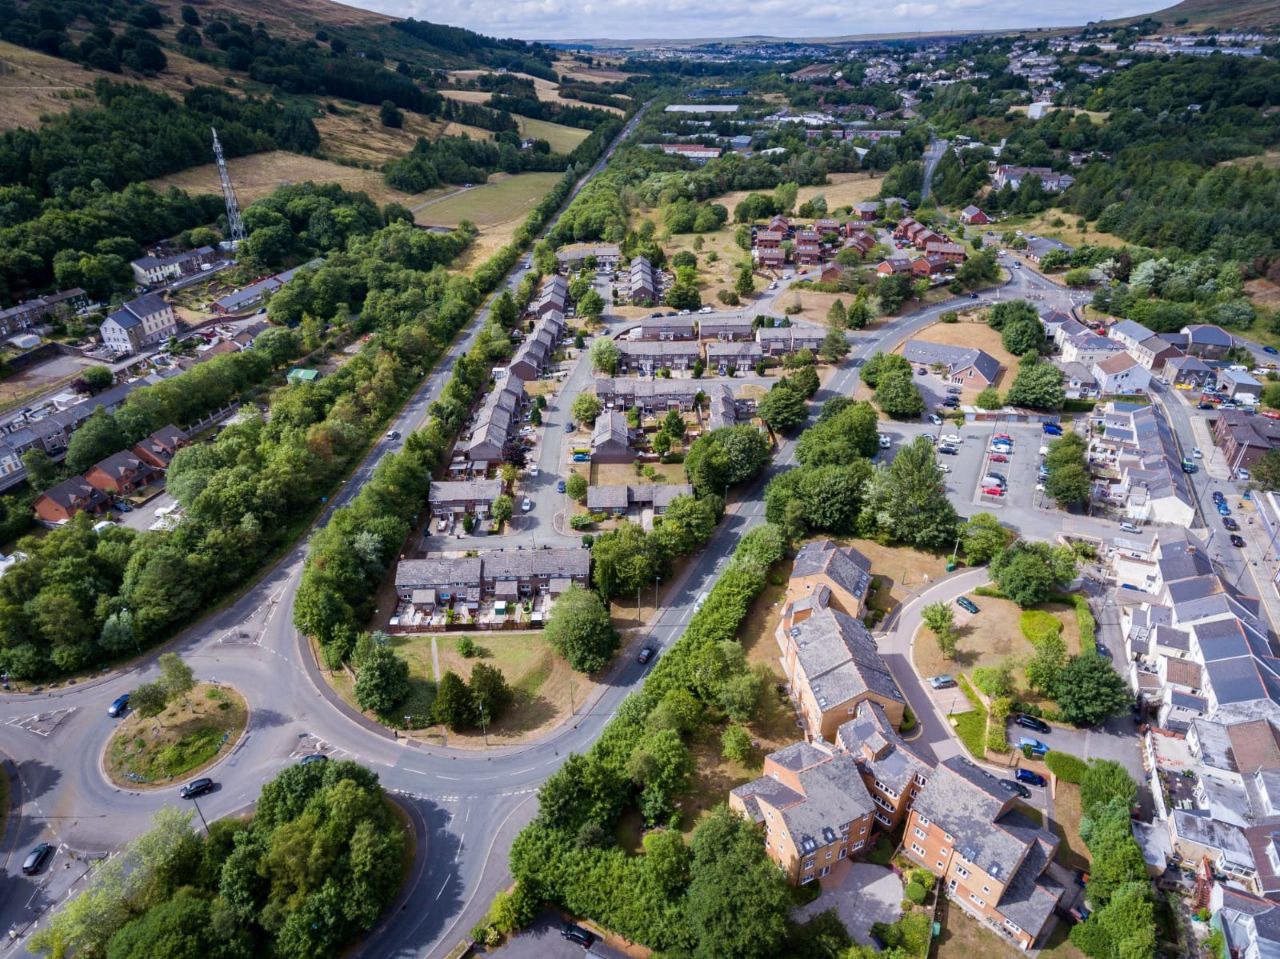 A view of Blaenau Gwent from the sky